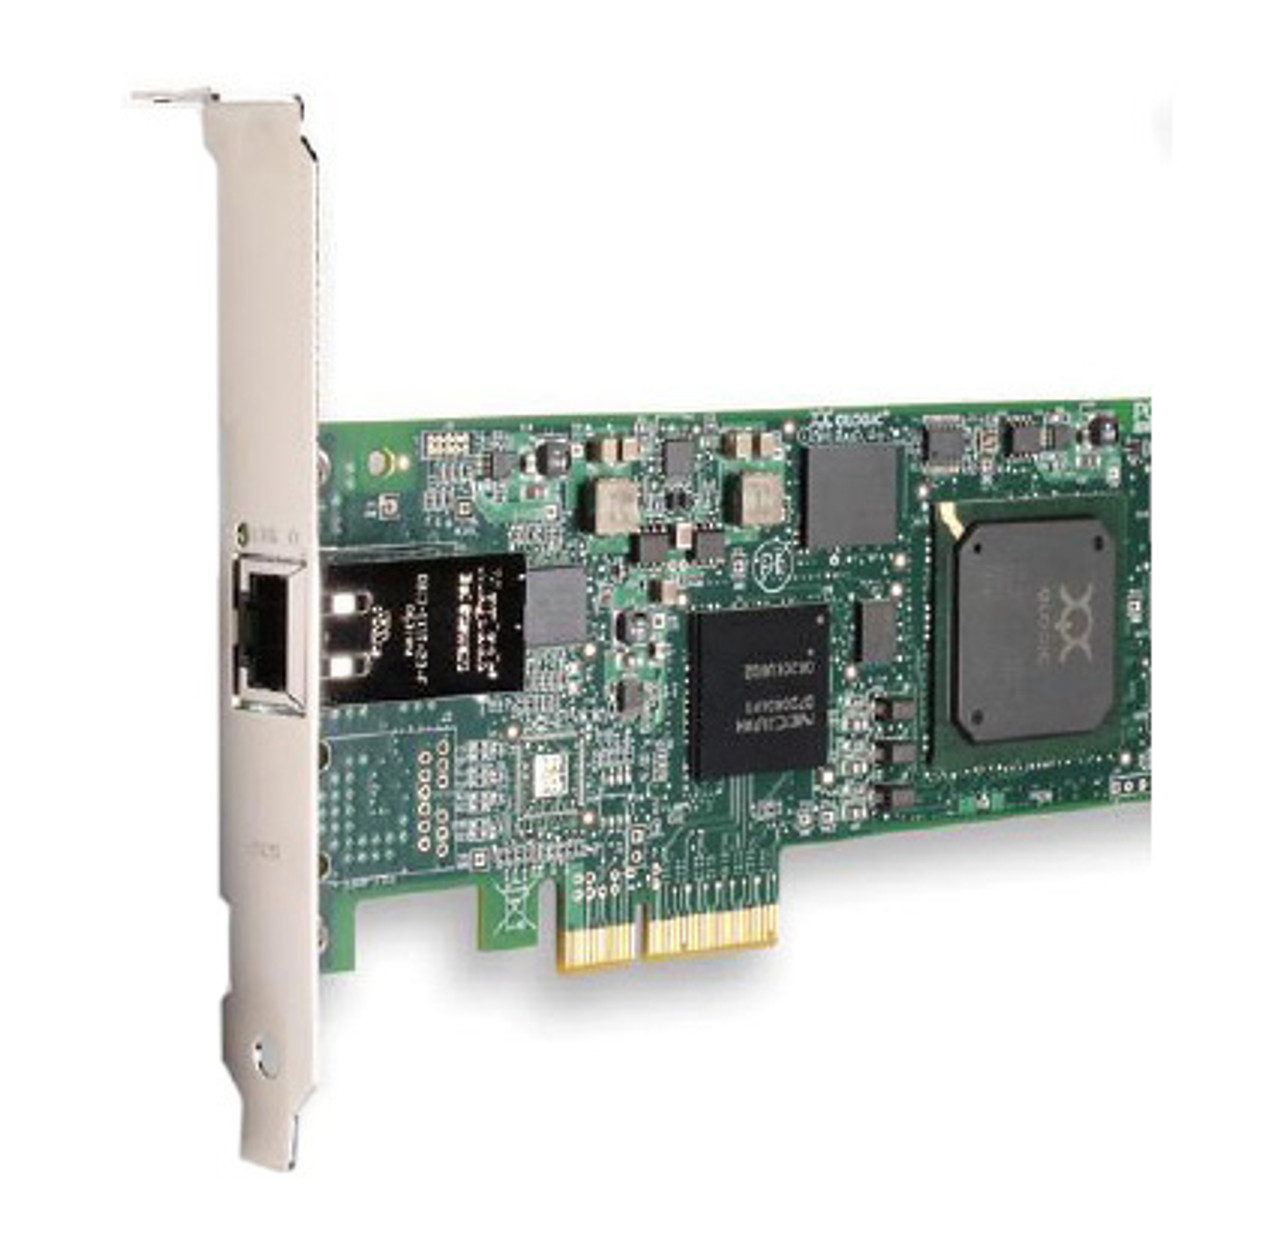 42C177006 IBM Dual-Ports iSCSI PCI Express x4 Host Bus Network Adapter by QLogic for System x3550 M2